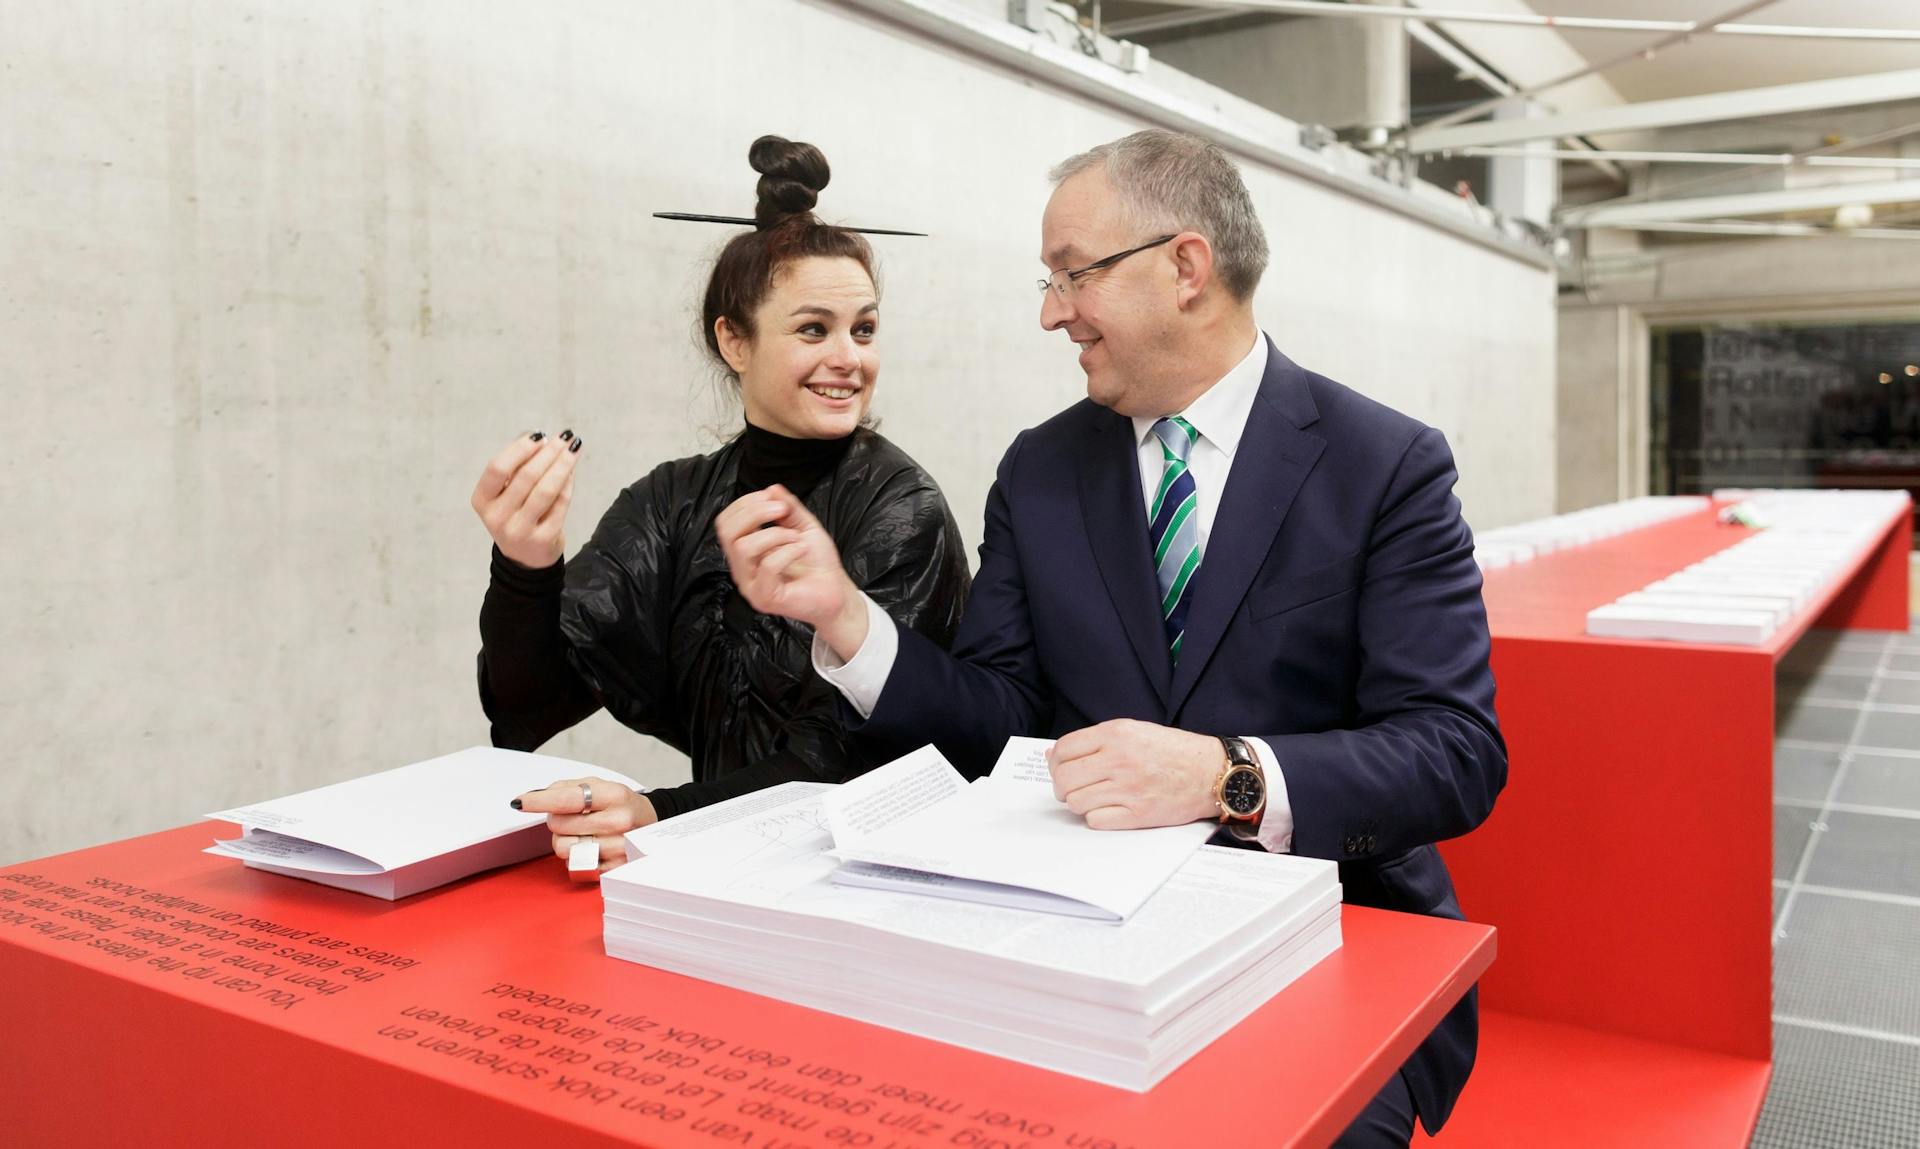 Opening Letters to the Mayor. Curator Eva Franch (Storefront for Art and Architecture) en de burgemeester van Rotterdam, Ahmed Aboutaleb. Foto Fred Ernst. 